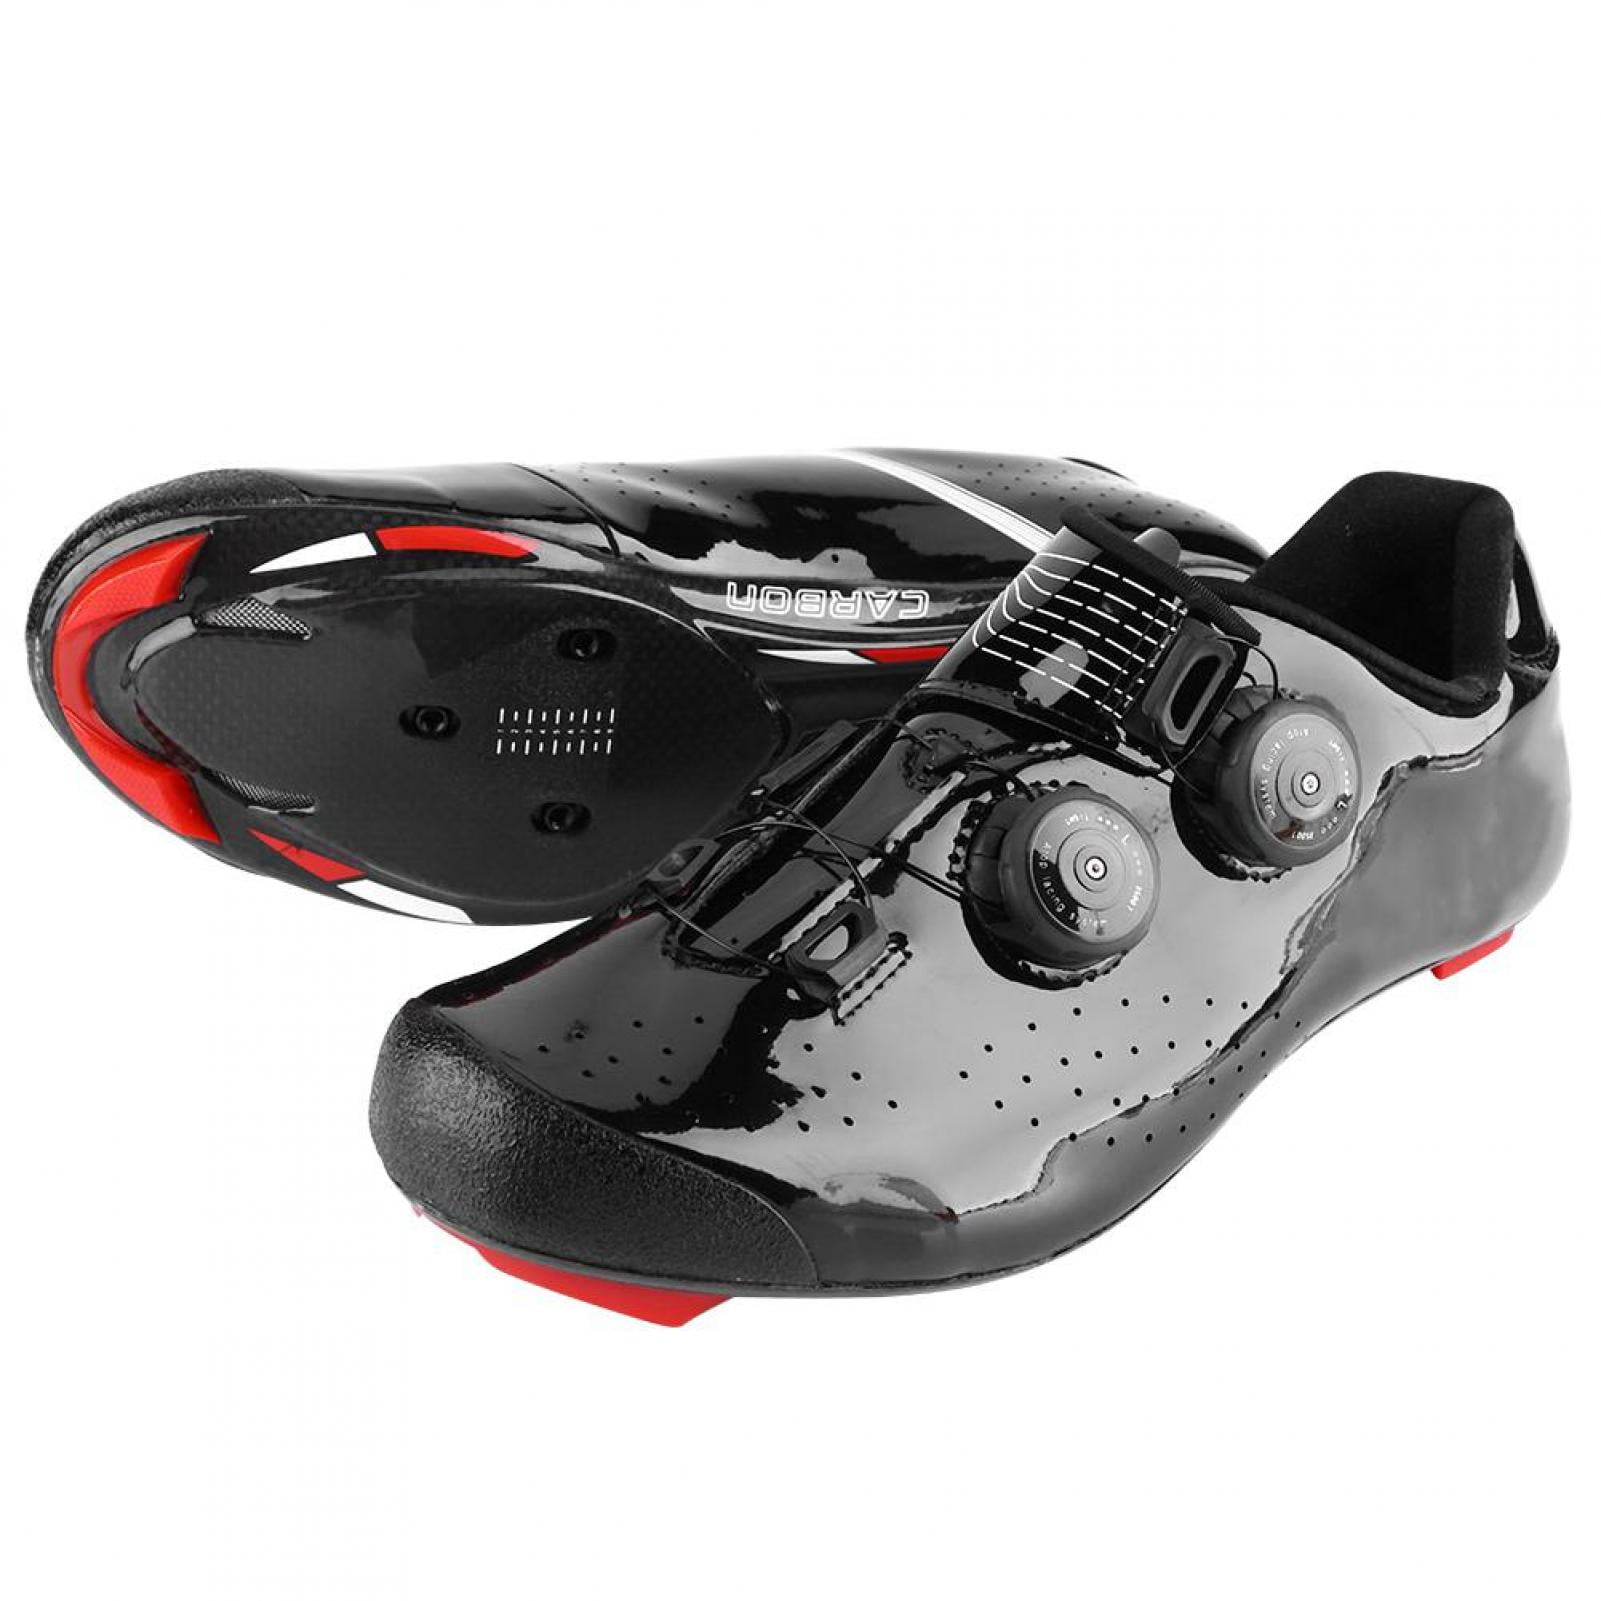 BOODUN Carbon Fiber Cycling Bike Bicycle Shoes Breathable Athletic Racing Shoe 